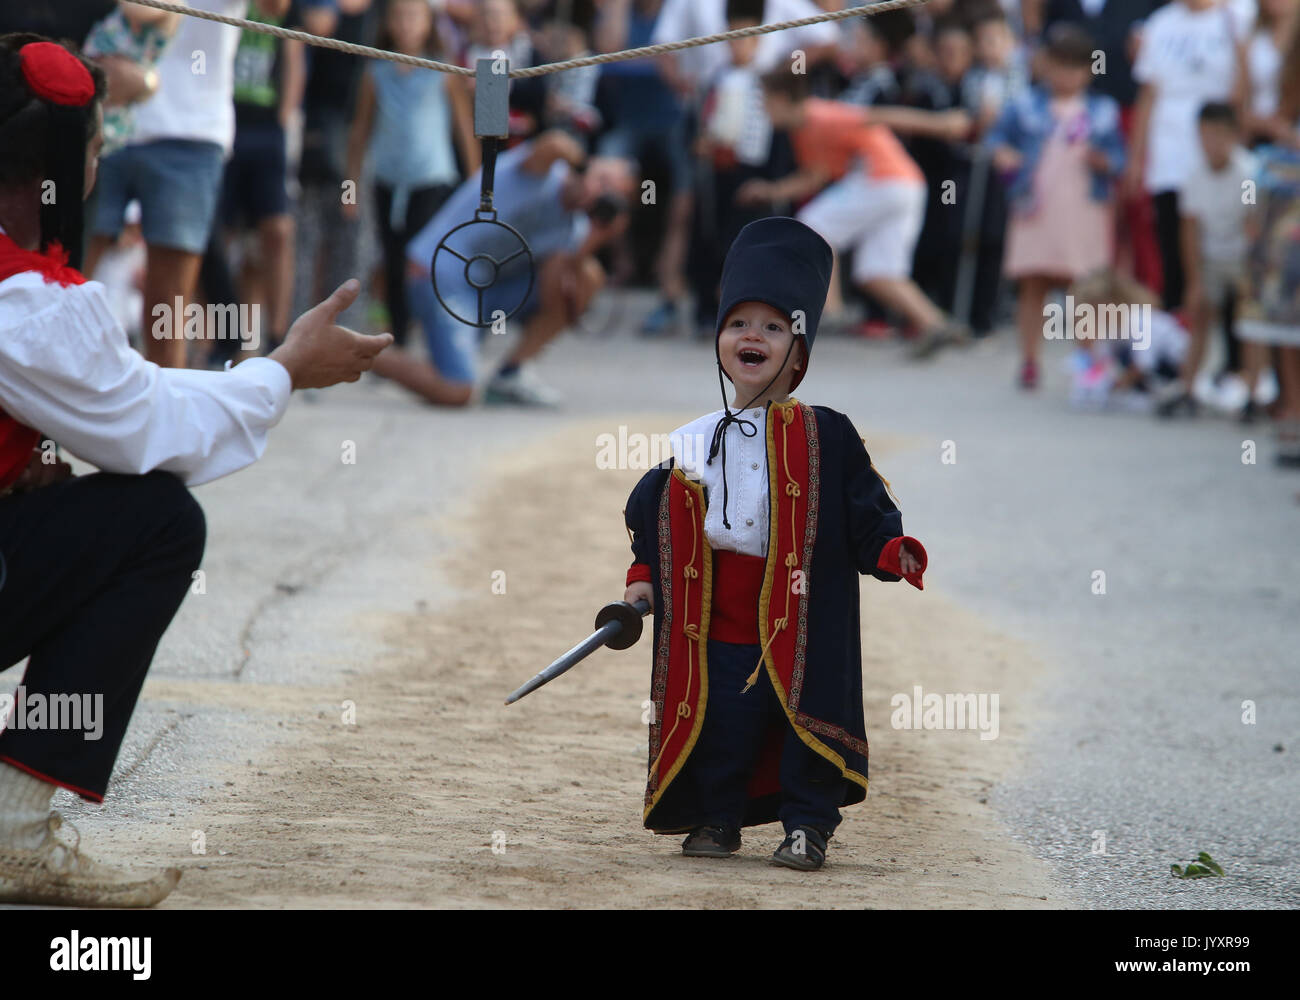 (170821) -- VUCKOVICI (CROATIA), Aug. 21, 2017 (Xinhua) -- A Boy participates in the Children's Alka lancing tournament in the village of Vuckovici, Croatia, on Aug. 20, 2017. Children's Alka is a lancing tournament held every August for boys up to ten years old since 1955 to commemorate their brave ancestors who defeated the Ottomans in 1715. (Xinhua/Ivo Cagalj) (zcc) Stock Photo